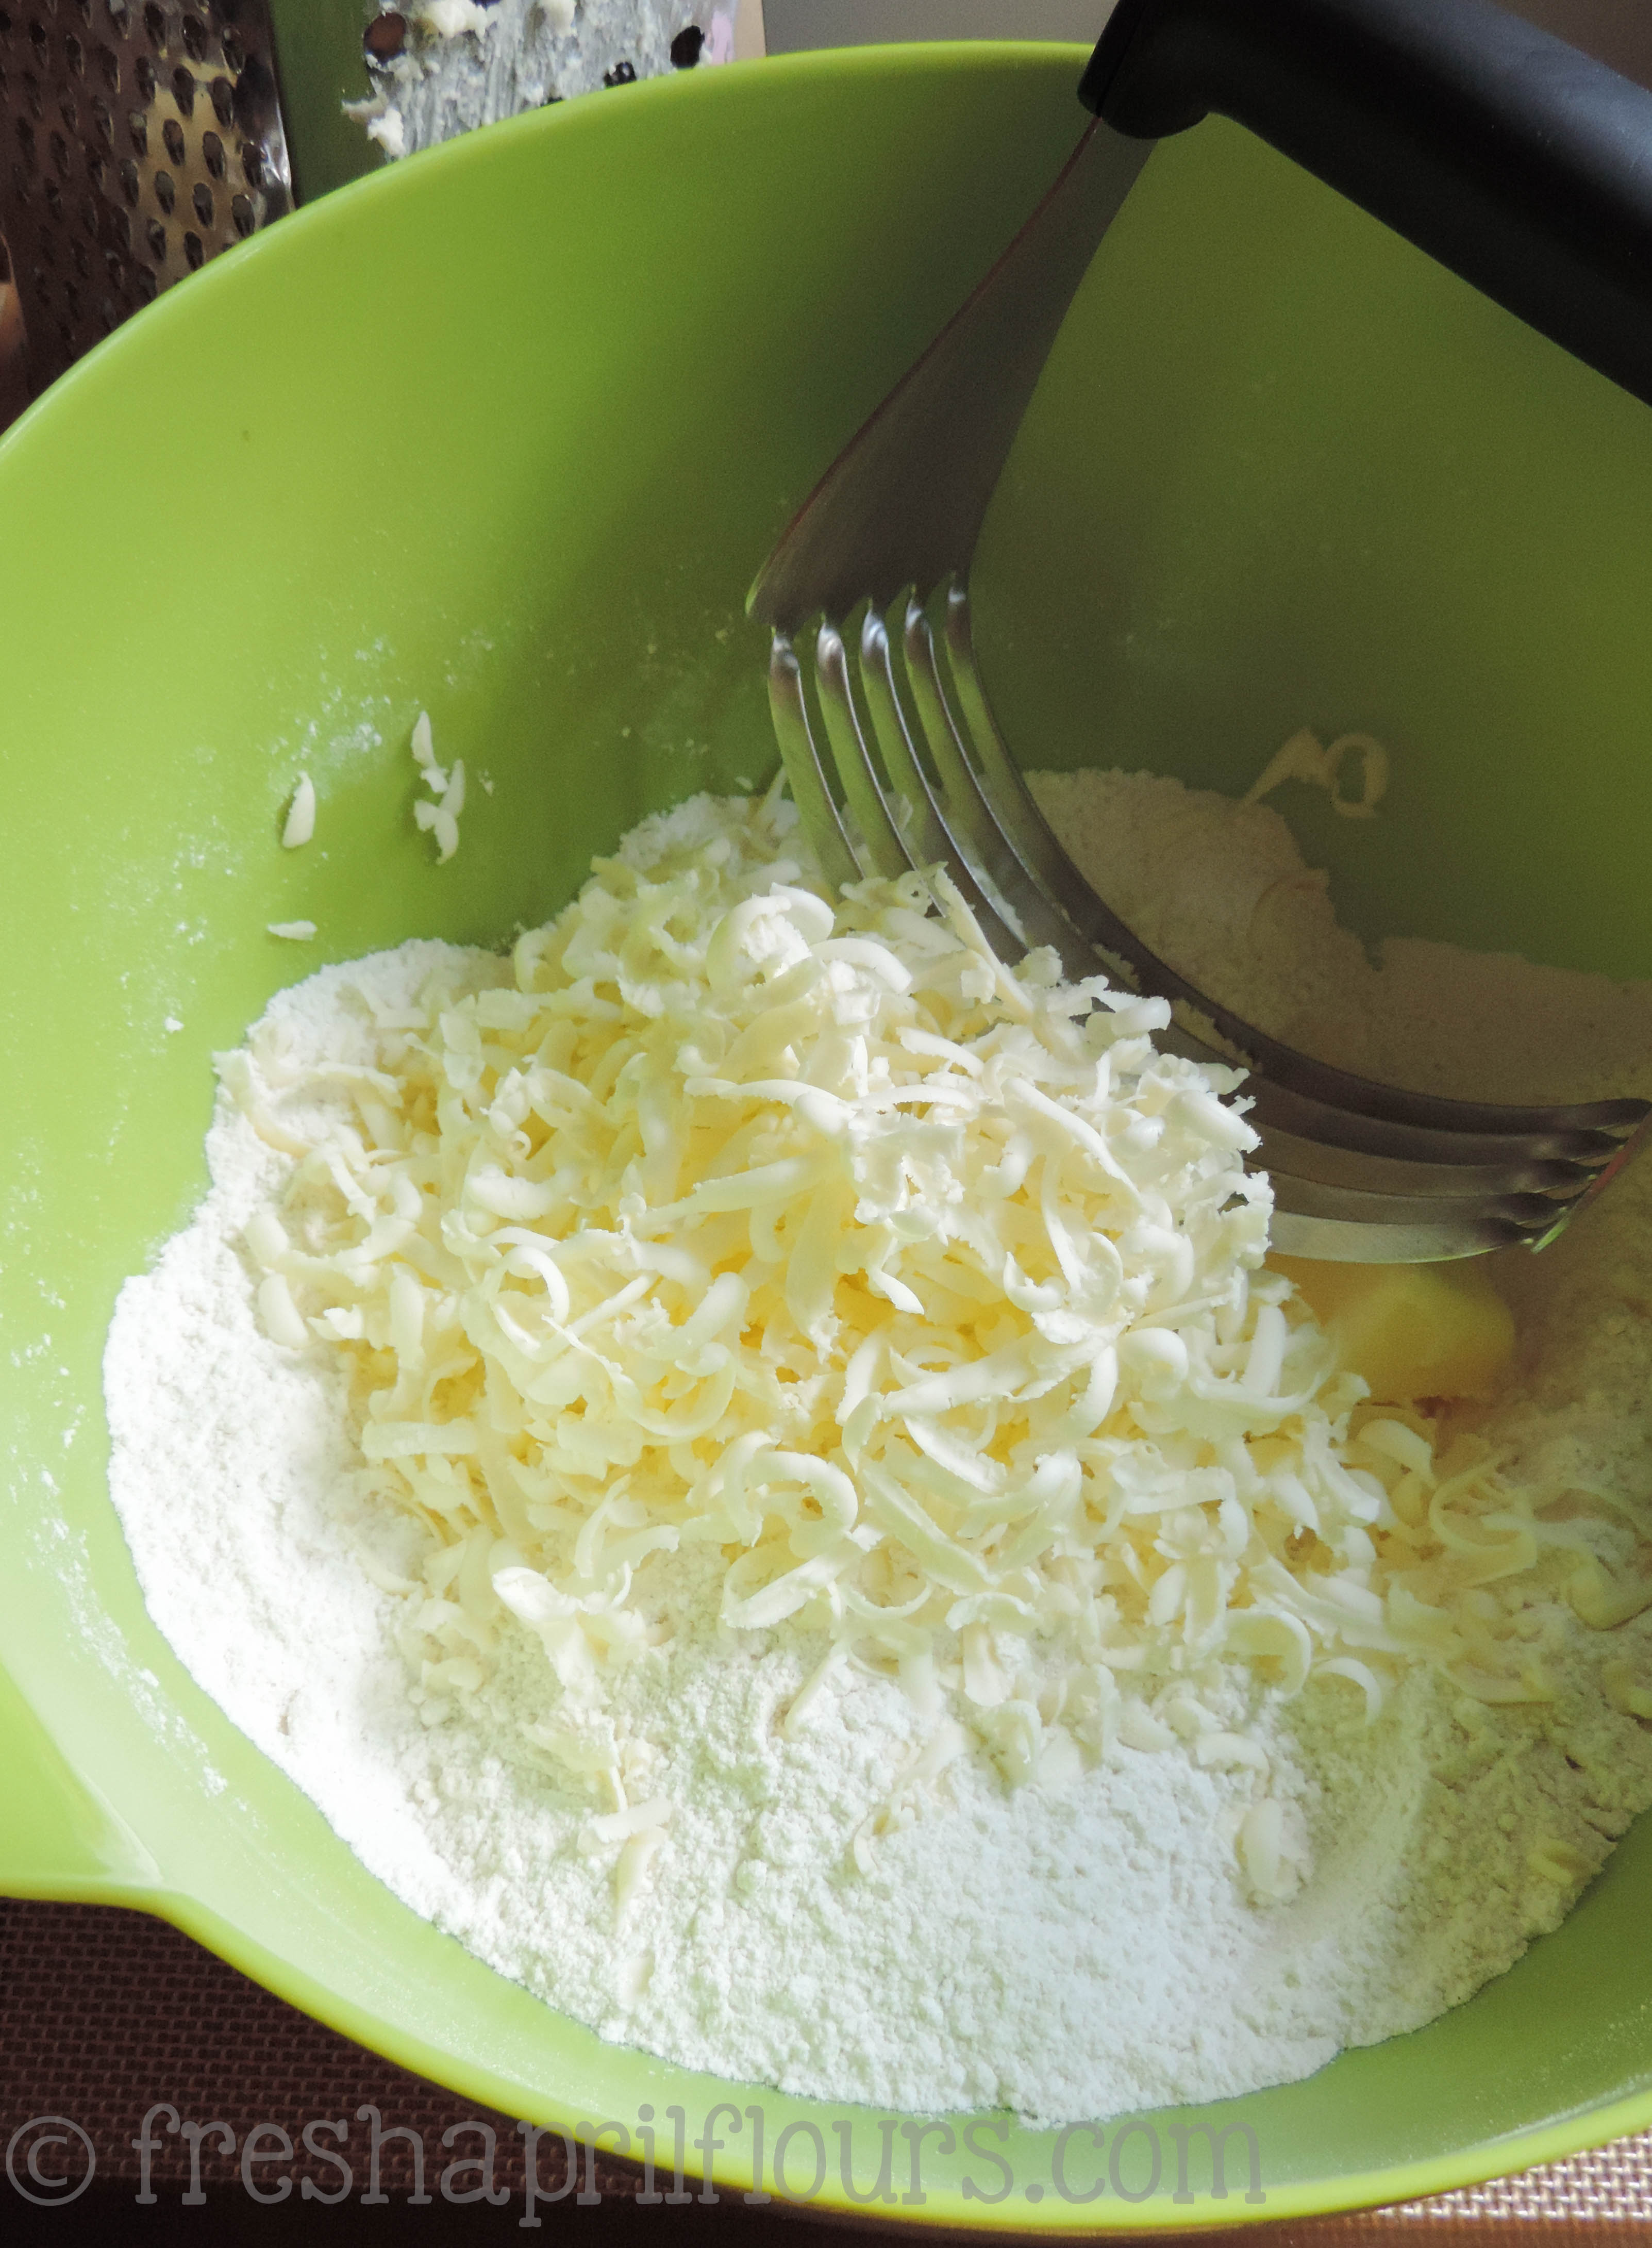 frozen, grated butter in scone dough